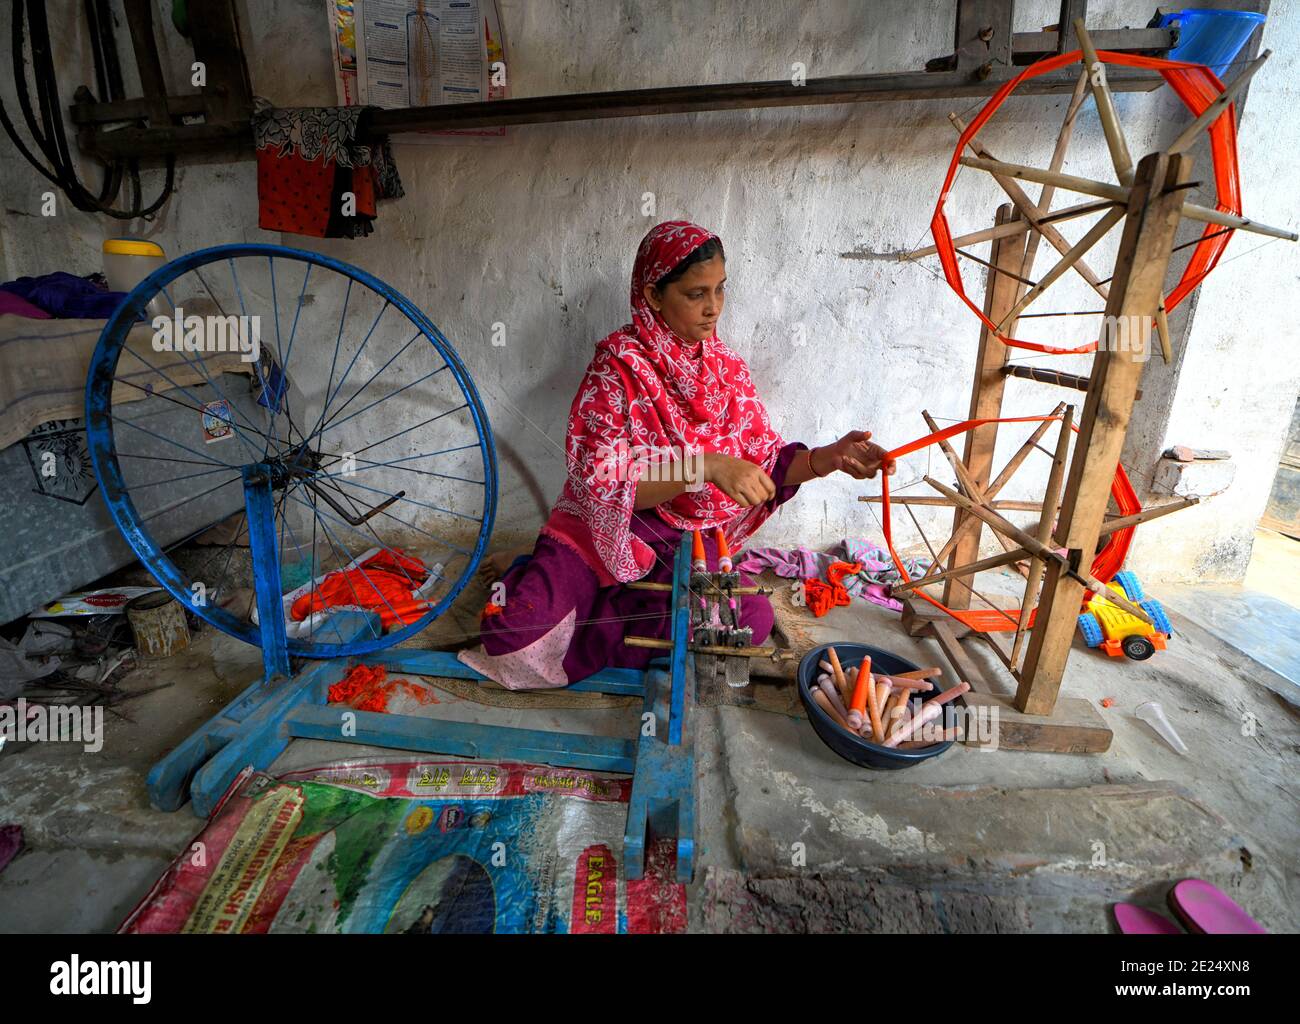 A woman seen extracting colourful yarns using a Handloom machine from the Jute threads.The traditional dress of an Indian Woman is Saree which is very popular throughout the World for its design, variety, textures, and colours. Santipur & Fulia from Nadia districts of West Bengal, India where 90 % population are engaged in weaving activities from long Generation. Stock Photo